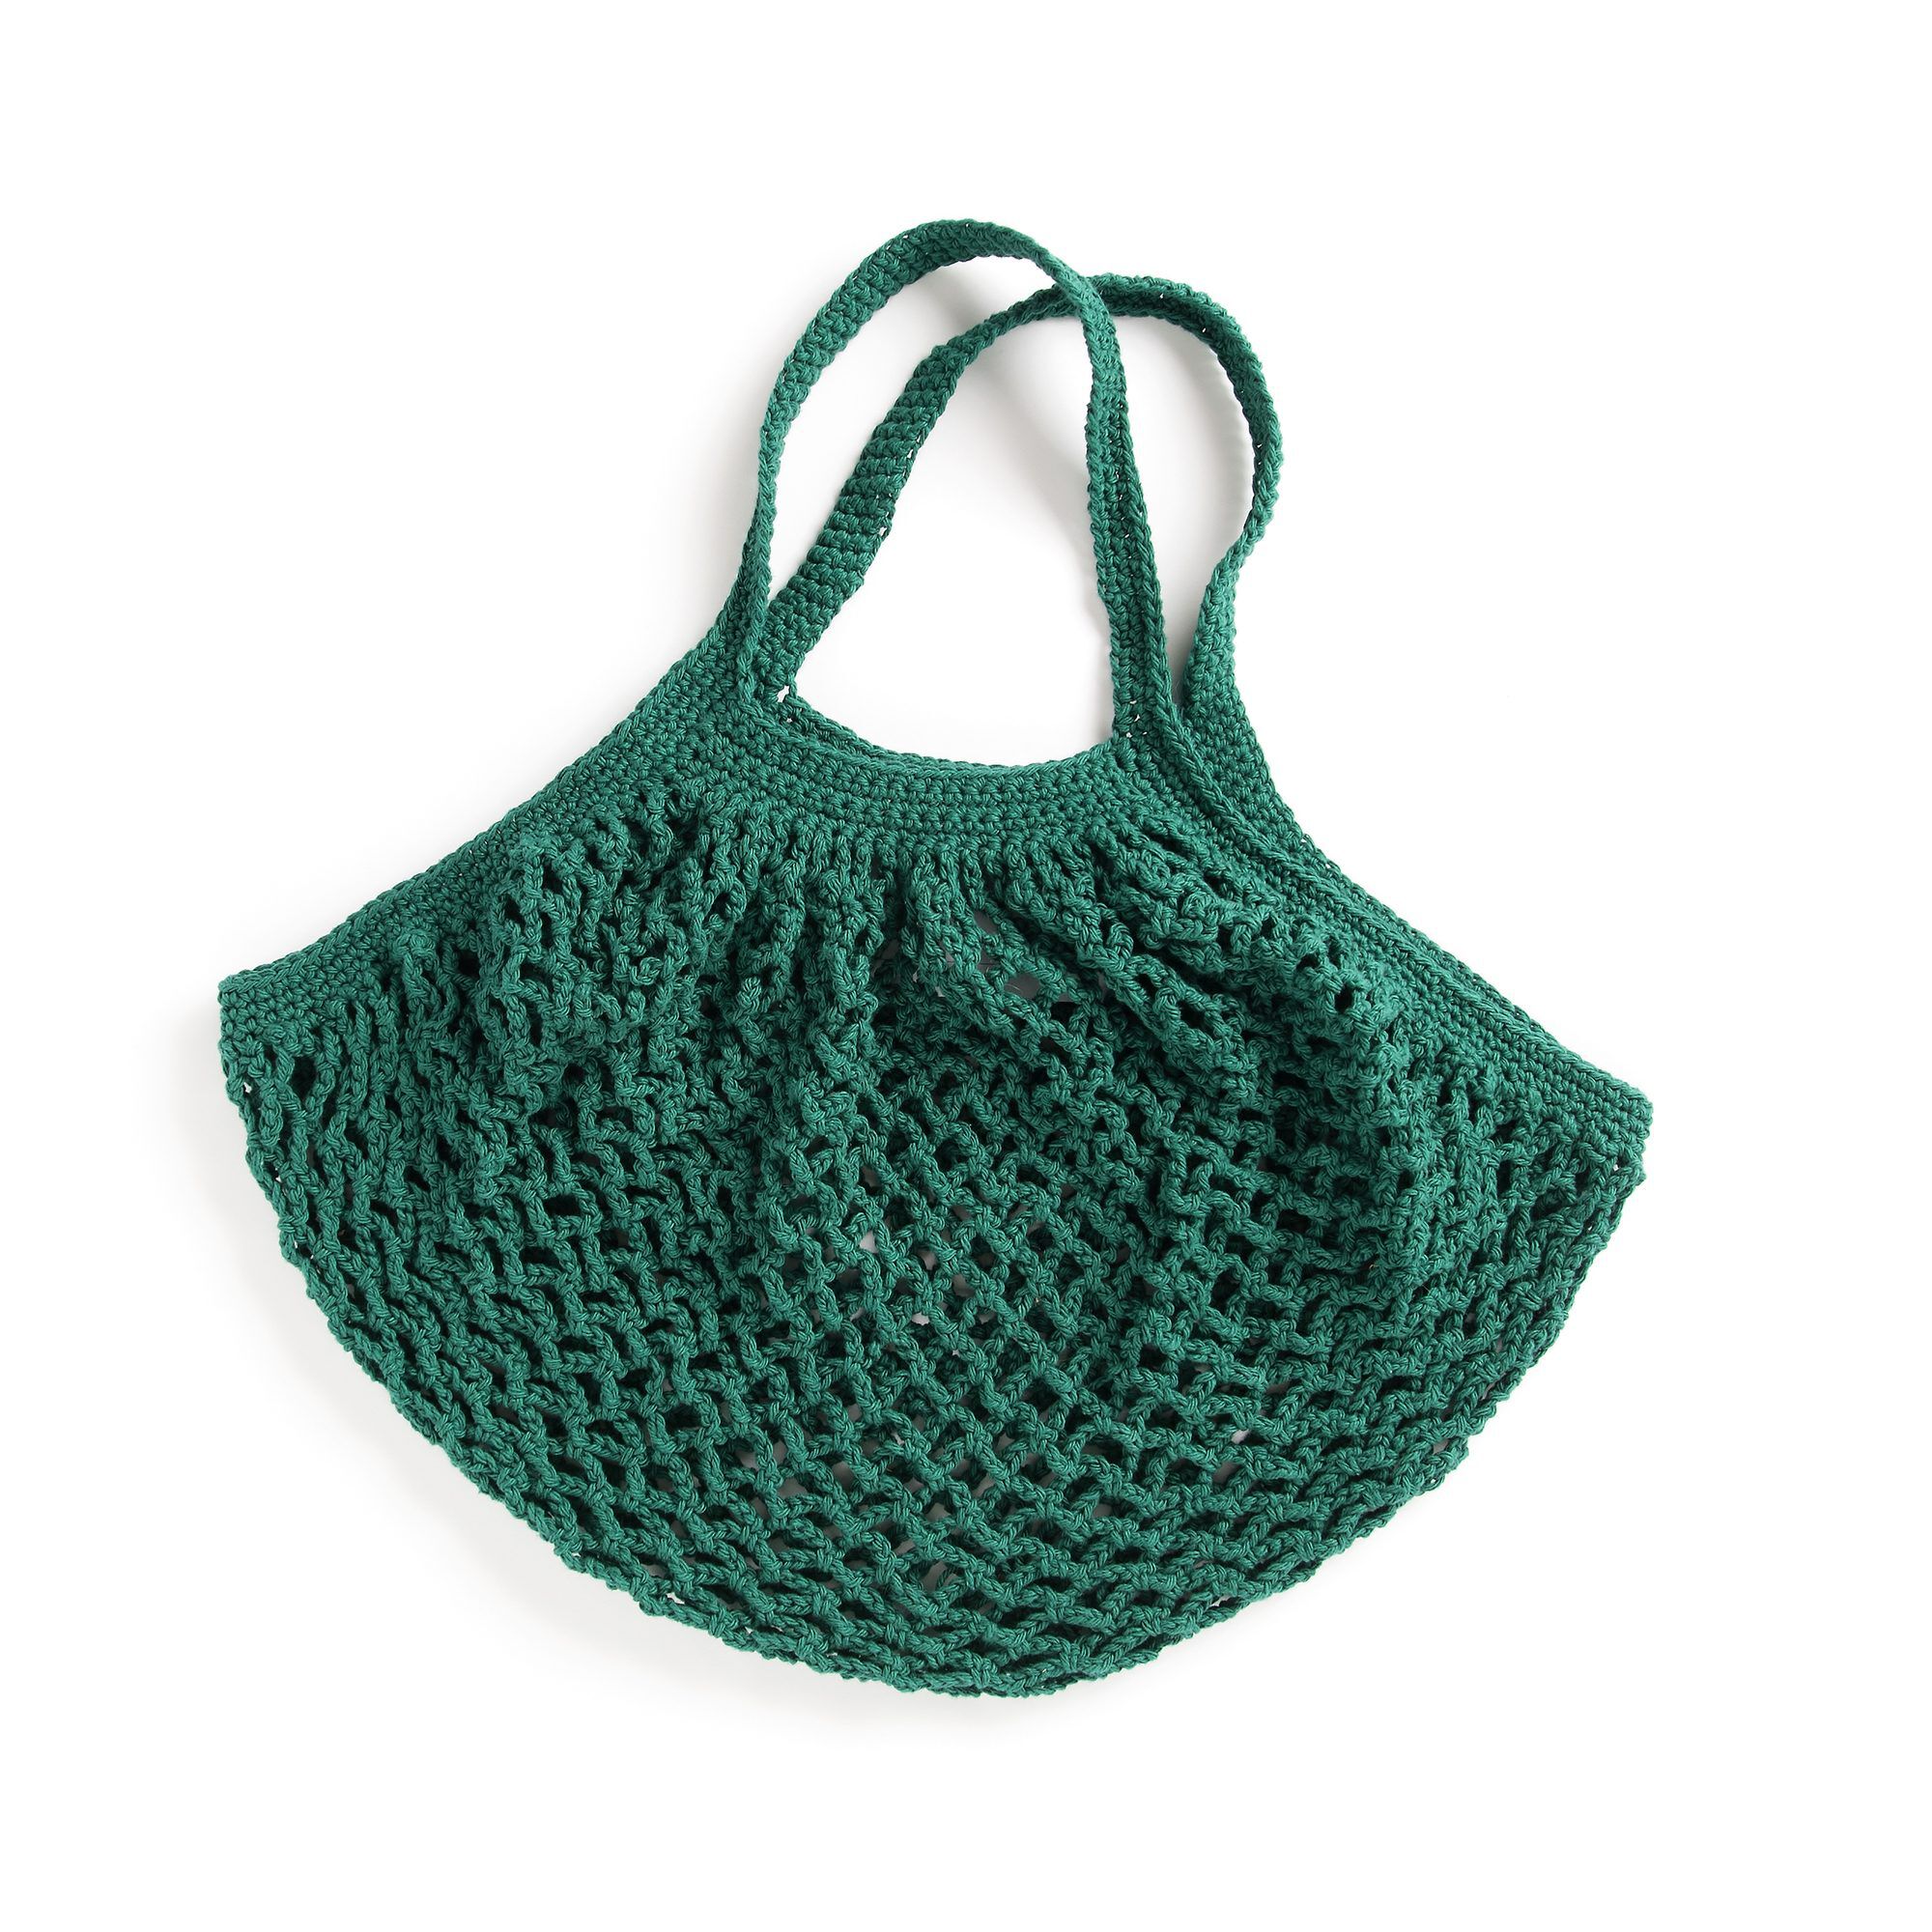 Lily Climbing Leaves Crochet Tote Bag Pattern